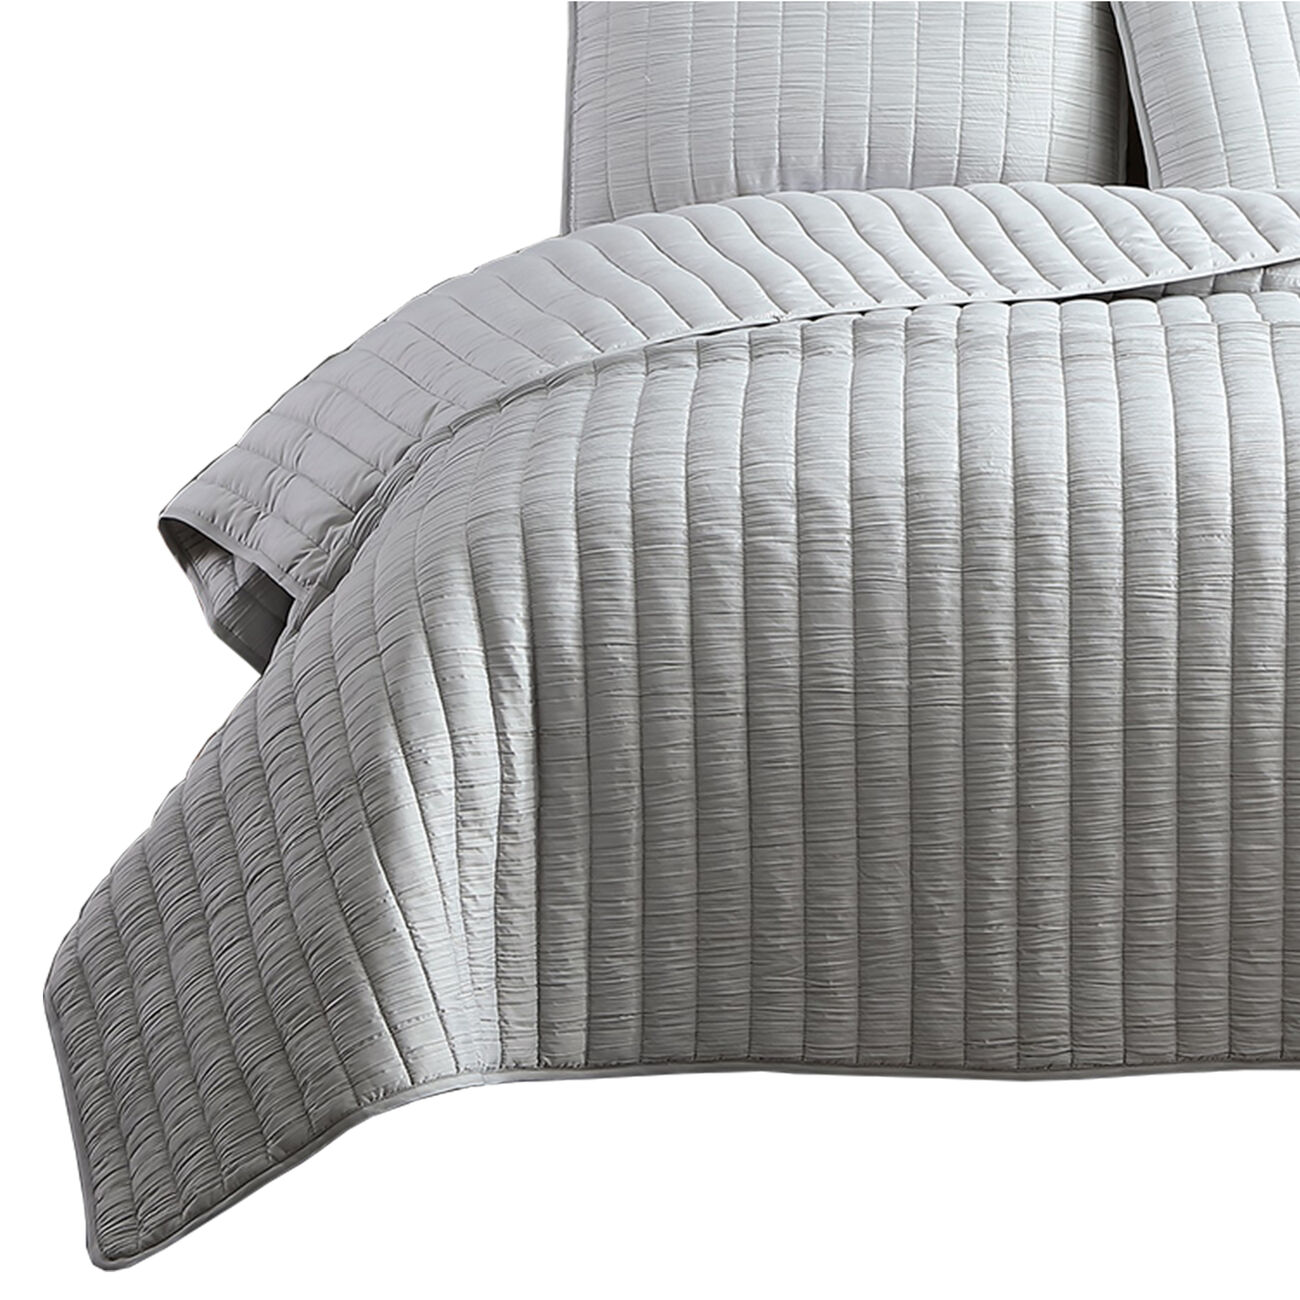 3 Piece Crinkle Queen Size Coverlet Set with Vertical Stitching,Light Gray